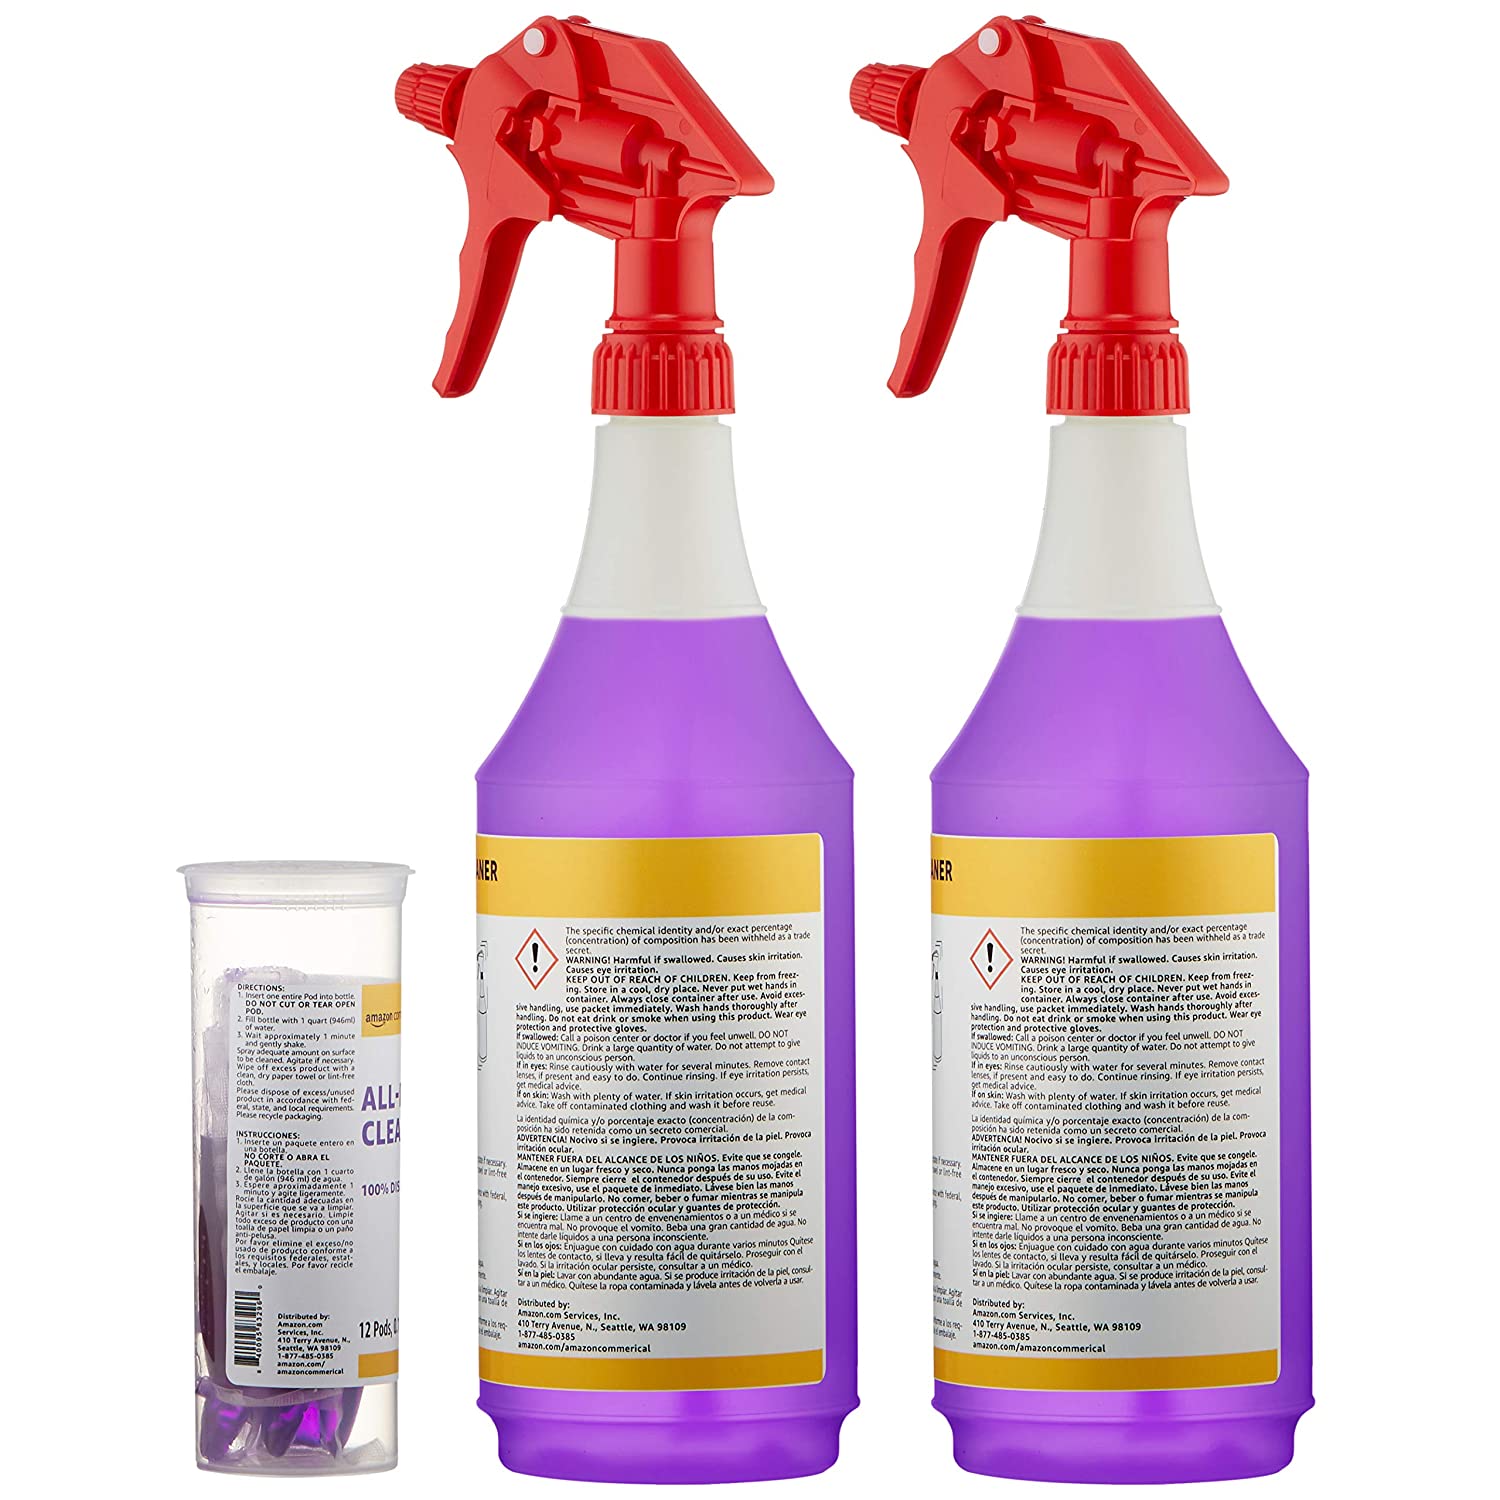 Commercial Dissolvable All-Purpose Cleaner Kit with 2